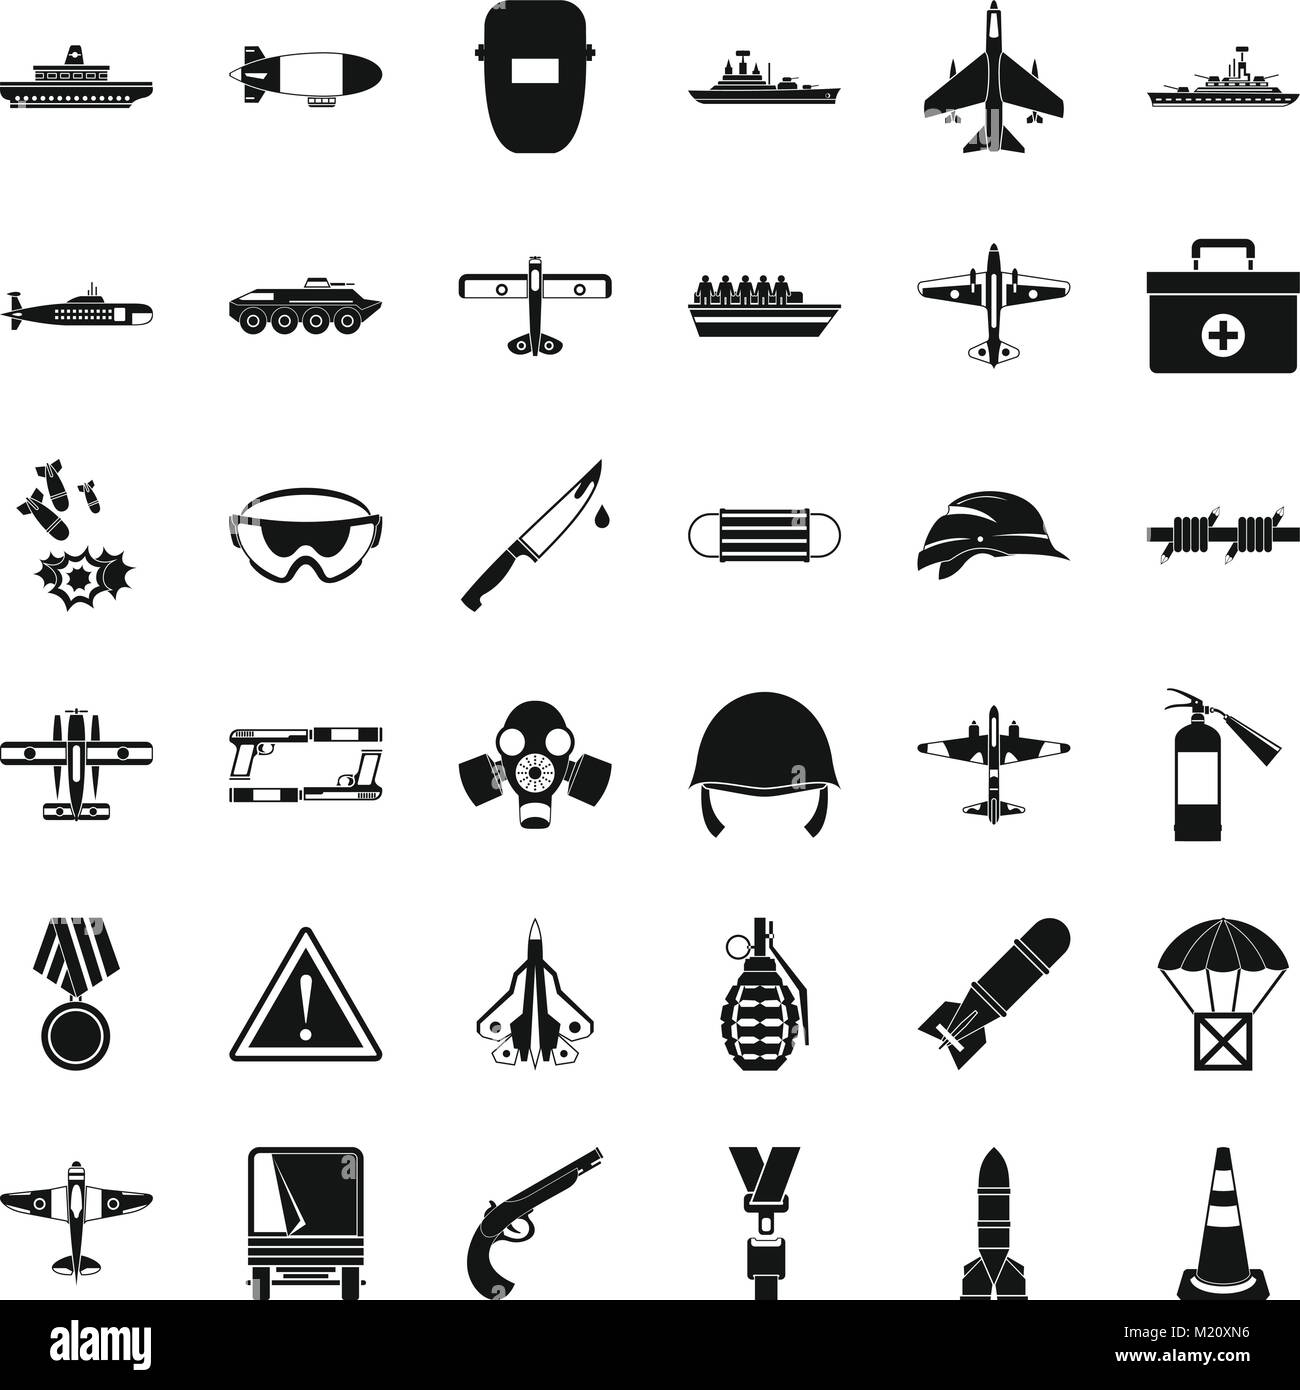 Military resources icons set, simple style Stock Vector